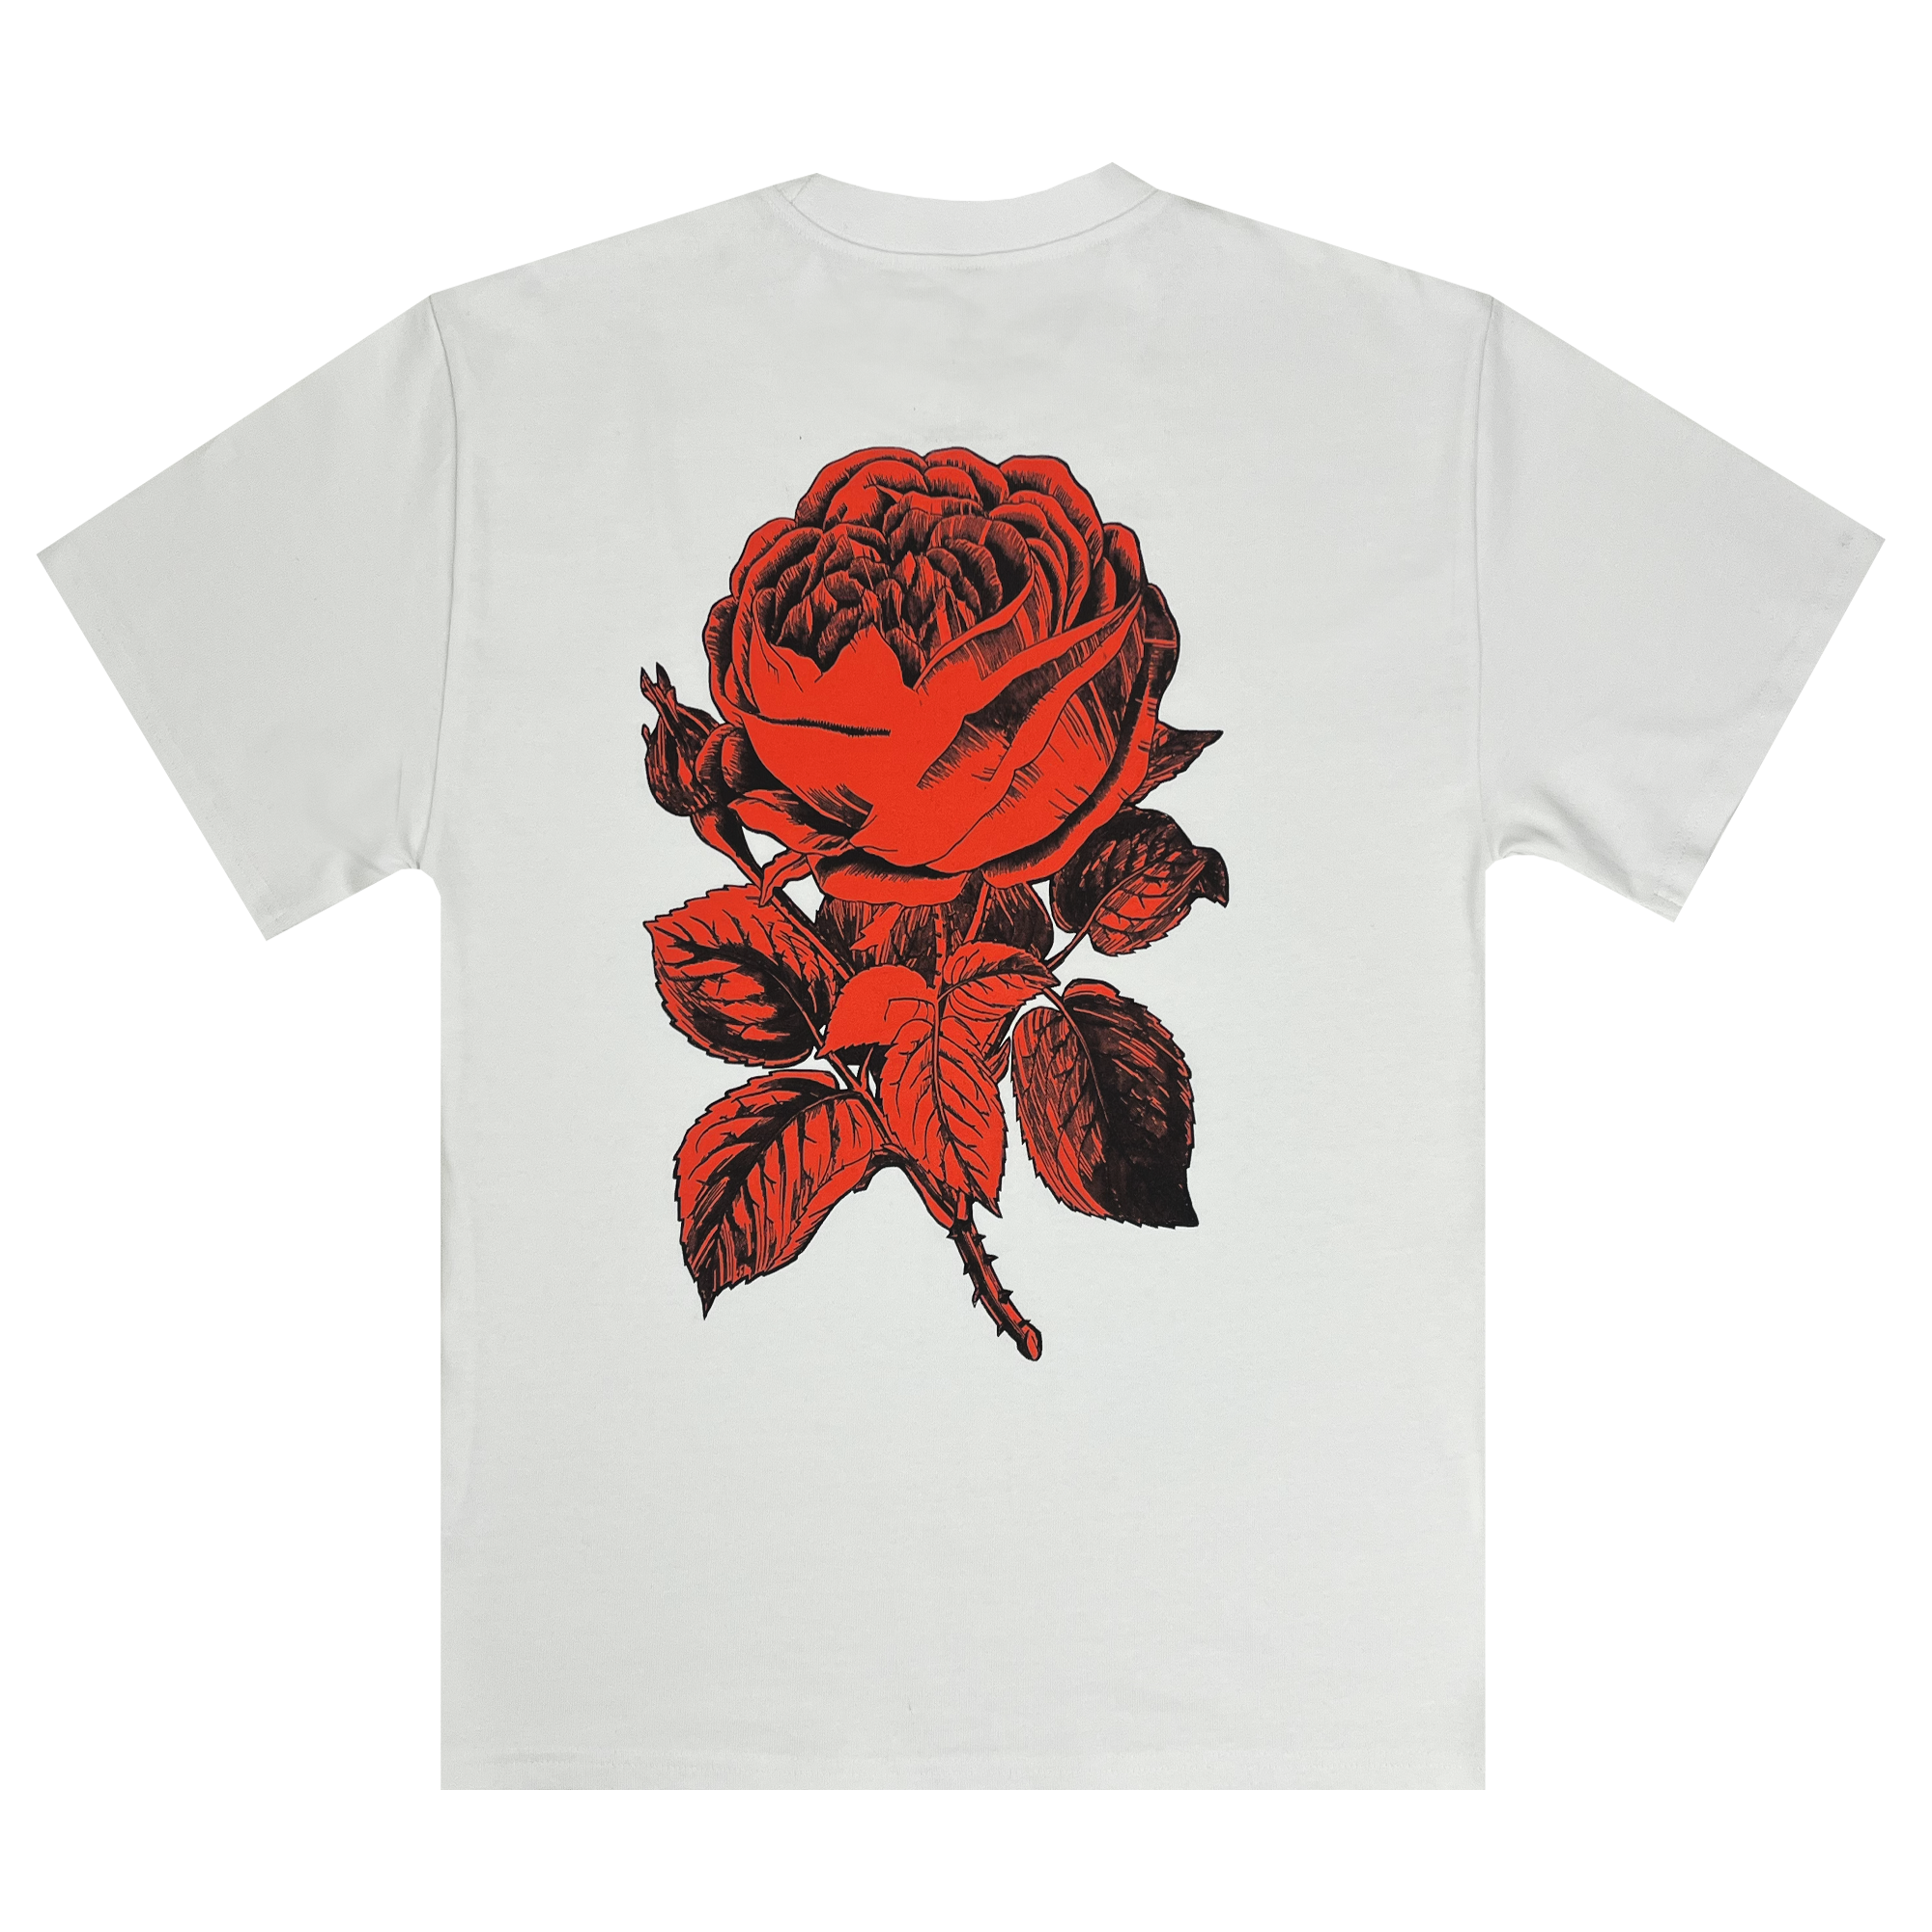 Back view of white tee with red rose printed center.